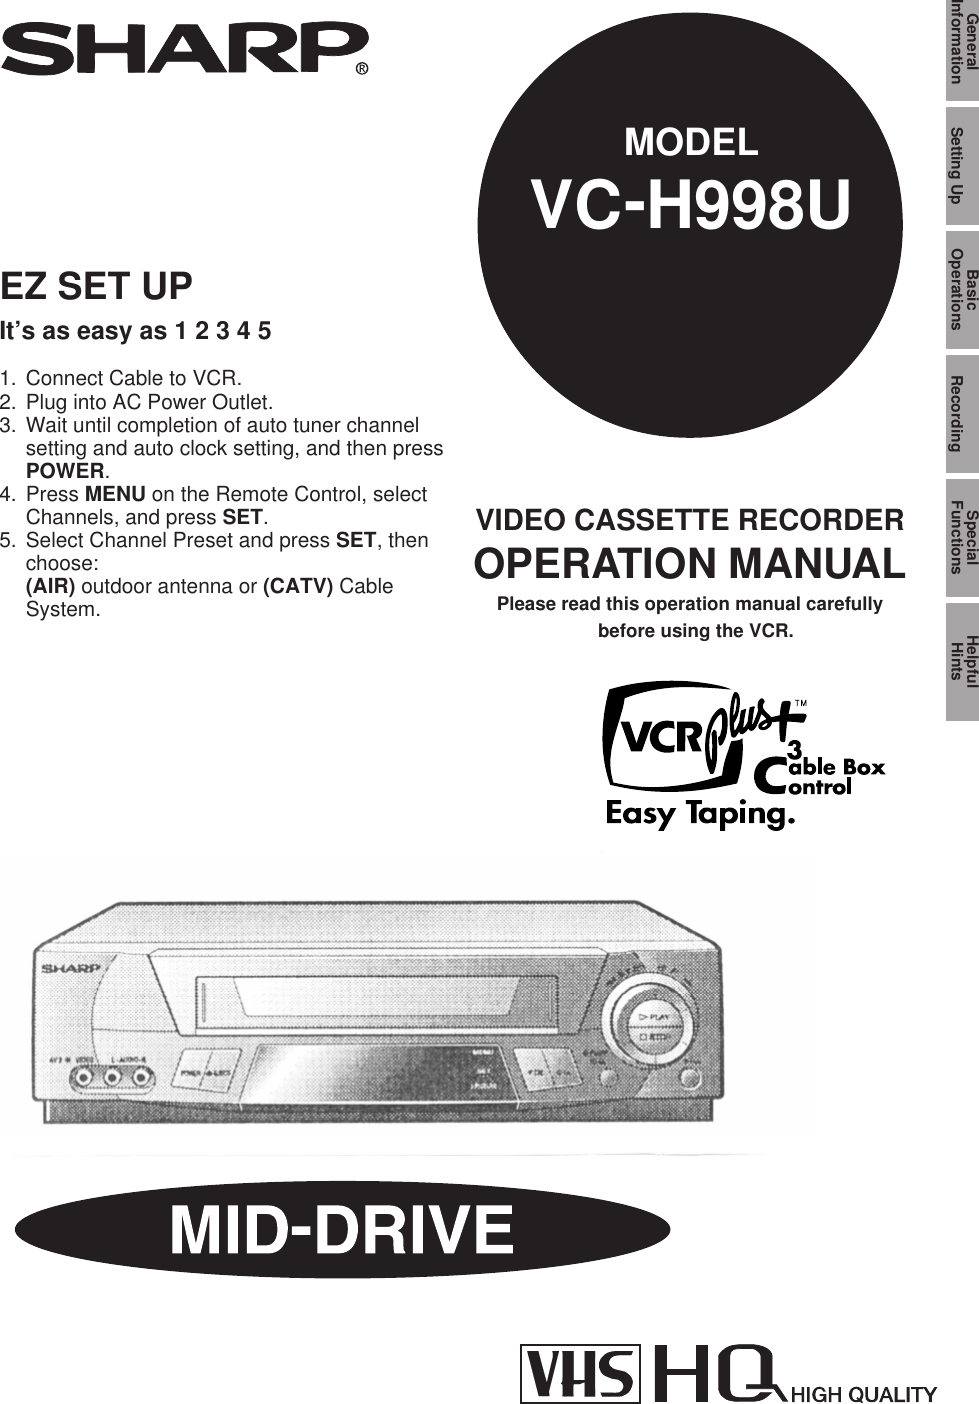 VIDEO CASSETTE RECORDEROPERATION MANUALPlease read this operation manual carefullybefore using the VCR.MODELVC-H998UGeneralInformation Setting Up BasicOperations SpecialFunctions HelpfulHintsRecordingEZ SET UPIt’s as easy as 1 2 3 4 51. Connect Cable to VCR.2. Plug into AC Power Outlet.3. Wait until completion of auto tuner channelsetting and auto clock setting, and then pressPOWER.4. Press MENU on the Remote Control, selectChannels, and press SET.5. Select Channel Preset and press SET, thenchoose:(AIR) outdoor antenna or (CATV) CableSystem.